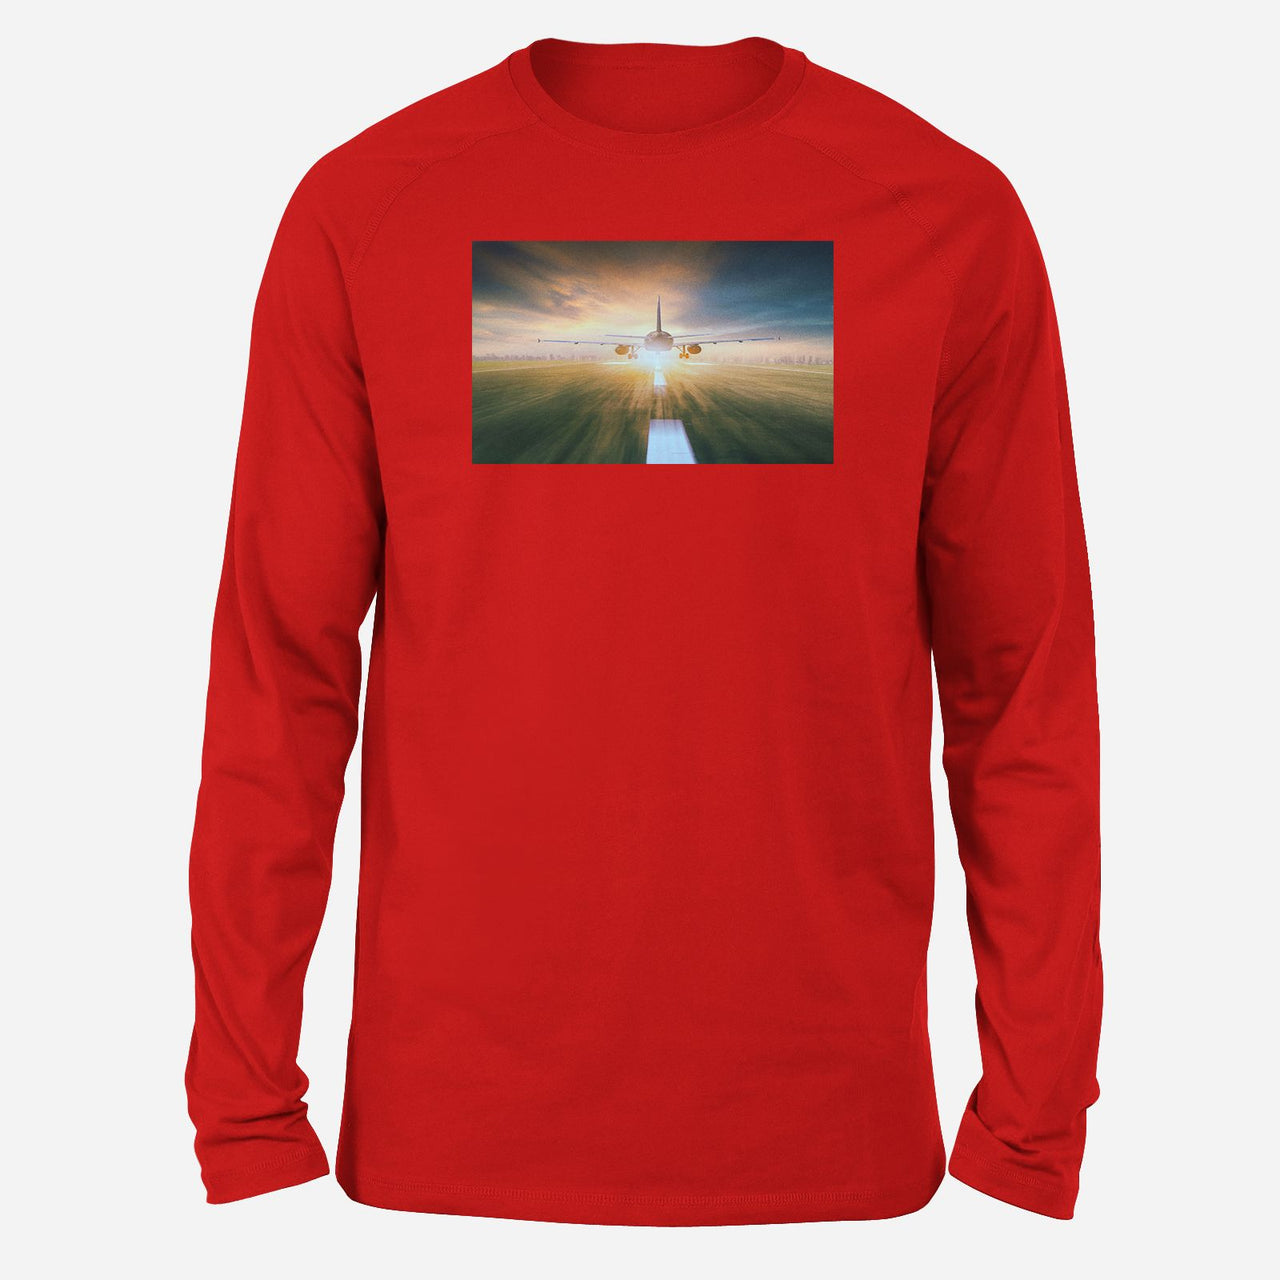 Airplane Flying Over Runway Designed Long-Sleeve T-Shirts